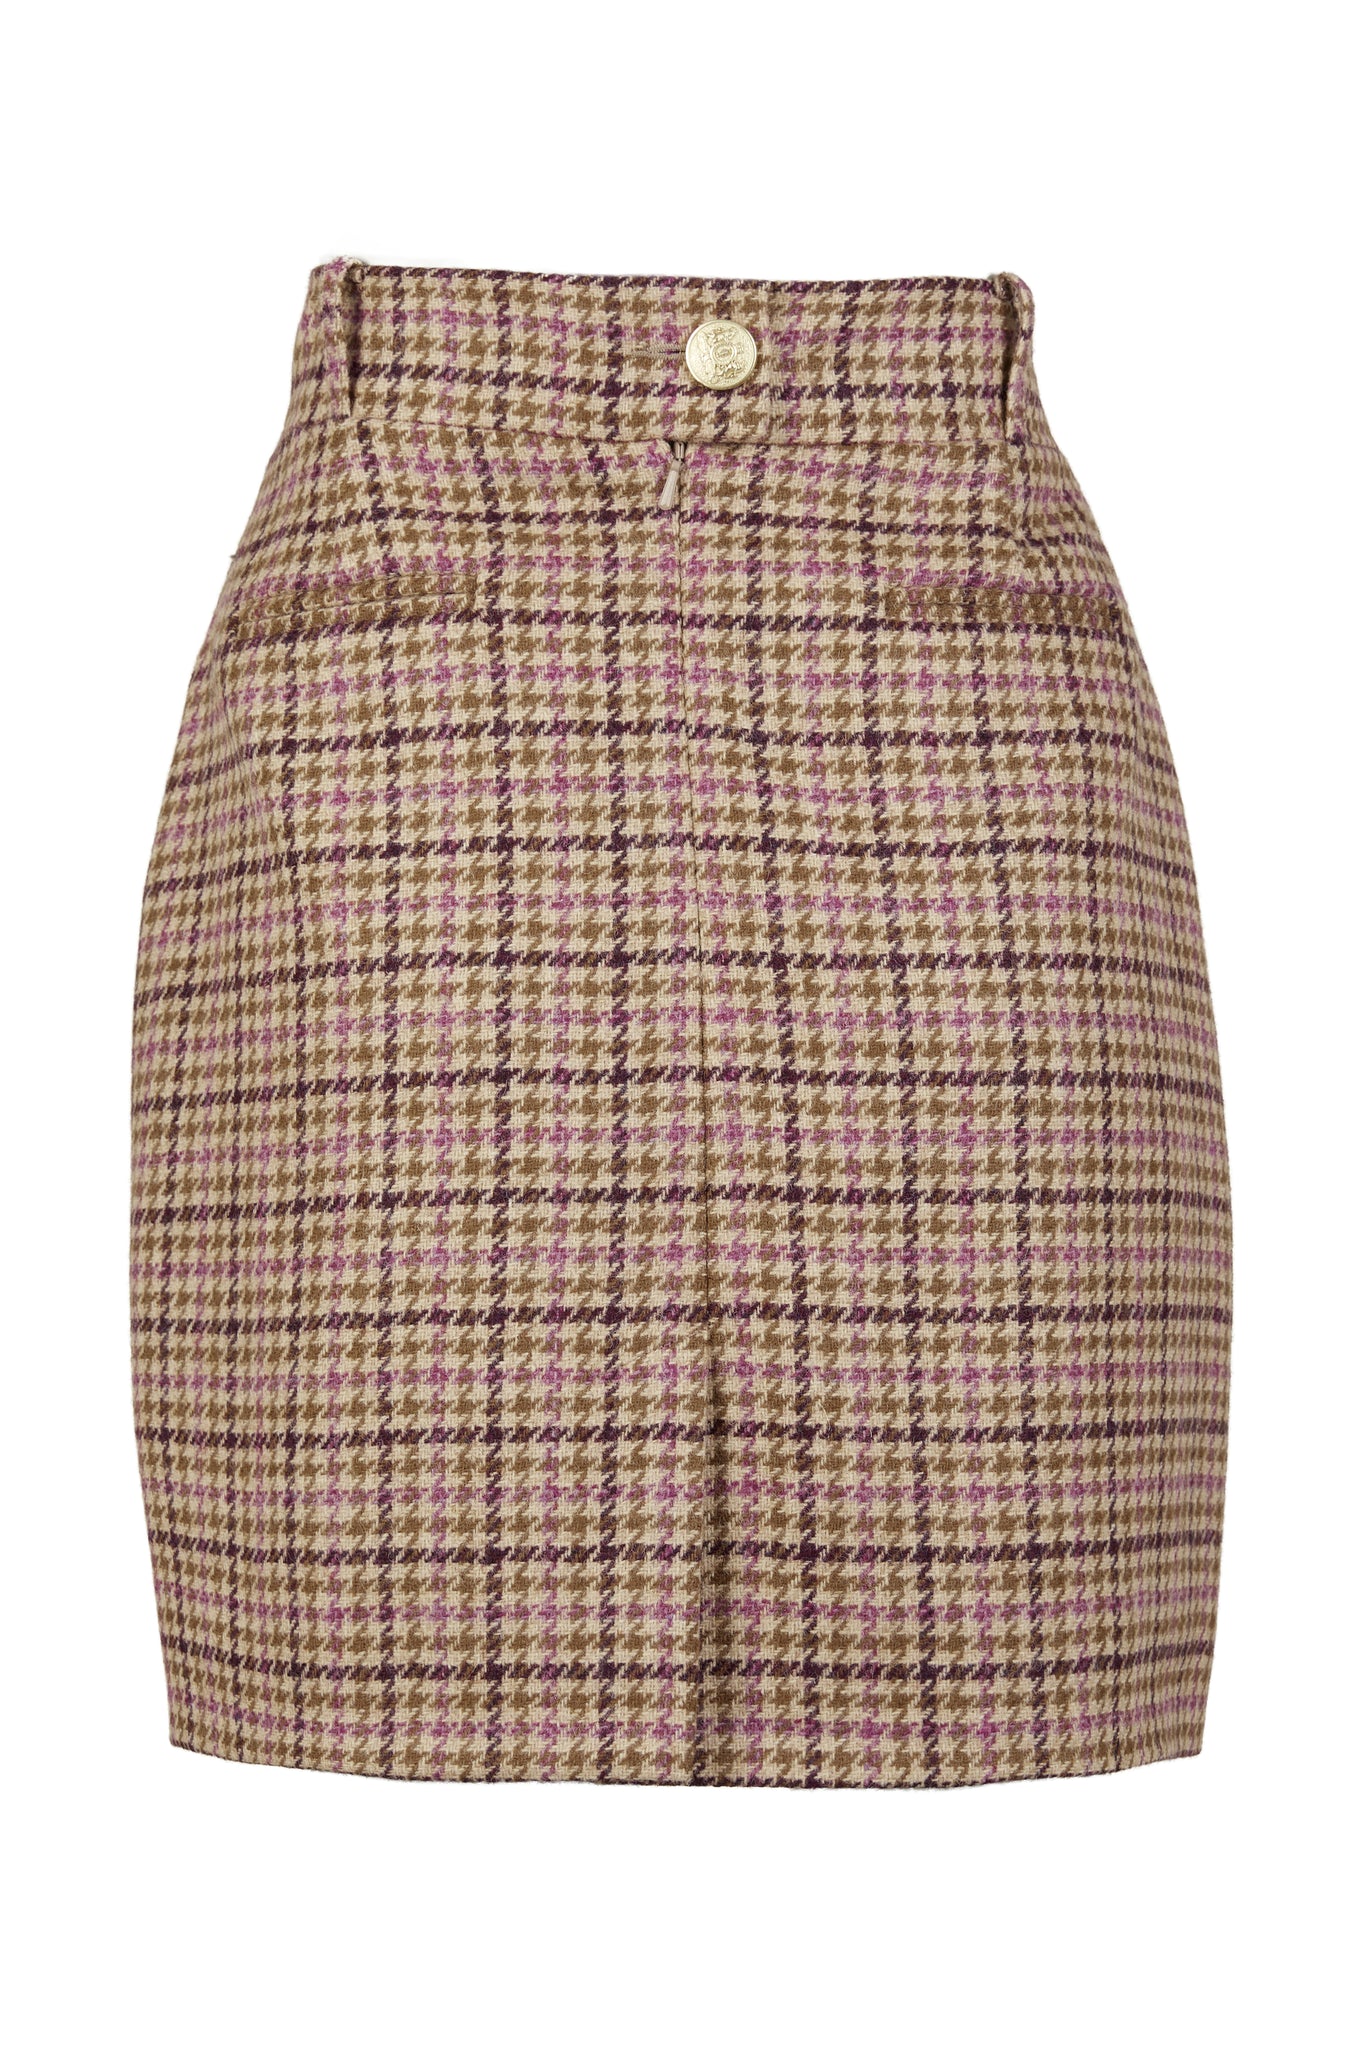 back of womens wool pencil mini skirt in pink check with concealed zip fastening on centre back and gold rivets down front